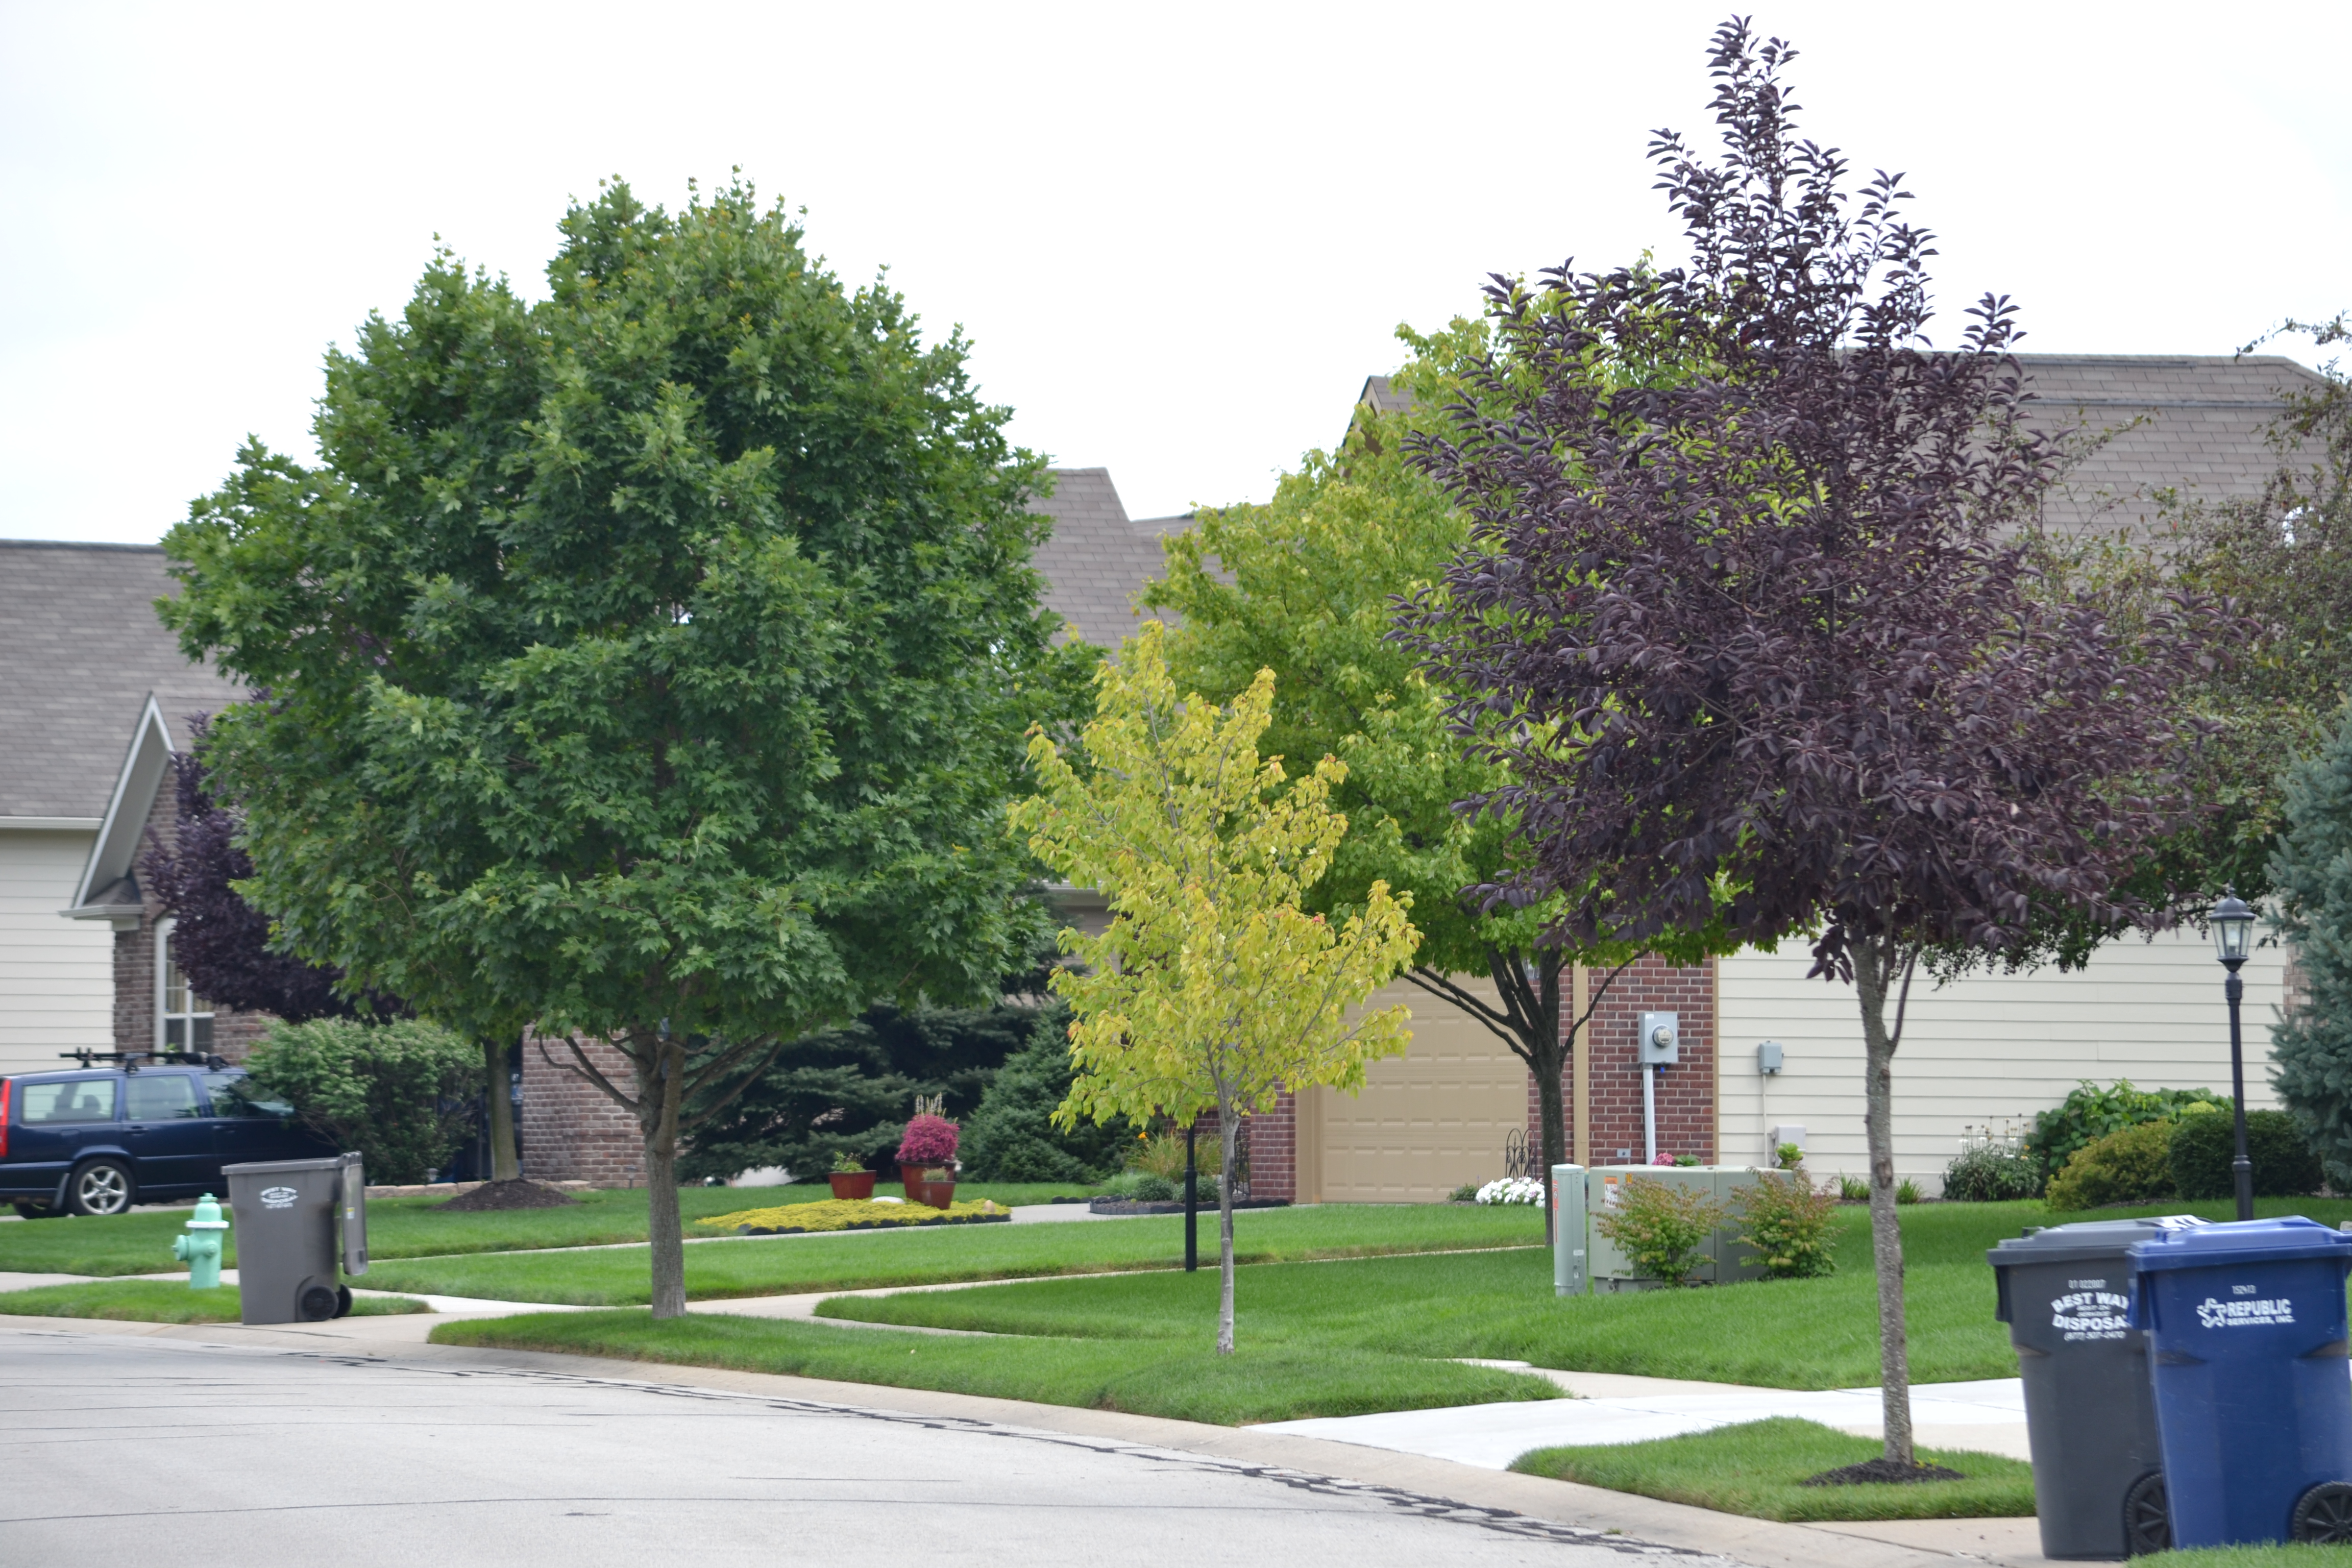 Street trees along a street in the Windermere subdivision that are not the same size or species but are mandated in HOA covenants to provide “uniformity.” (Photo by Ann Craig-Cinnamon)